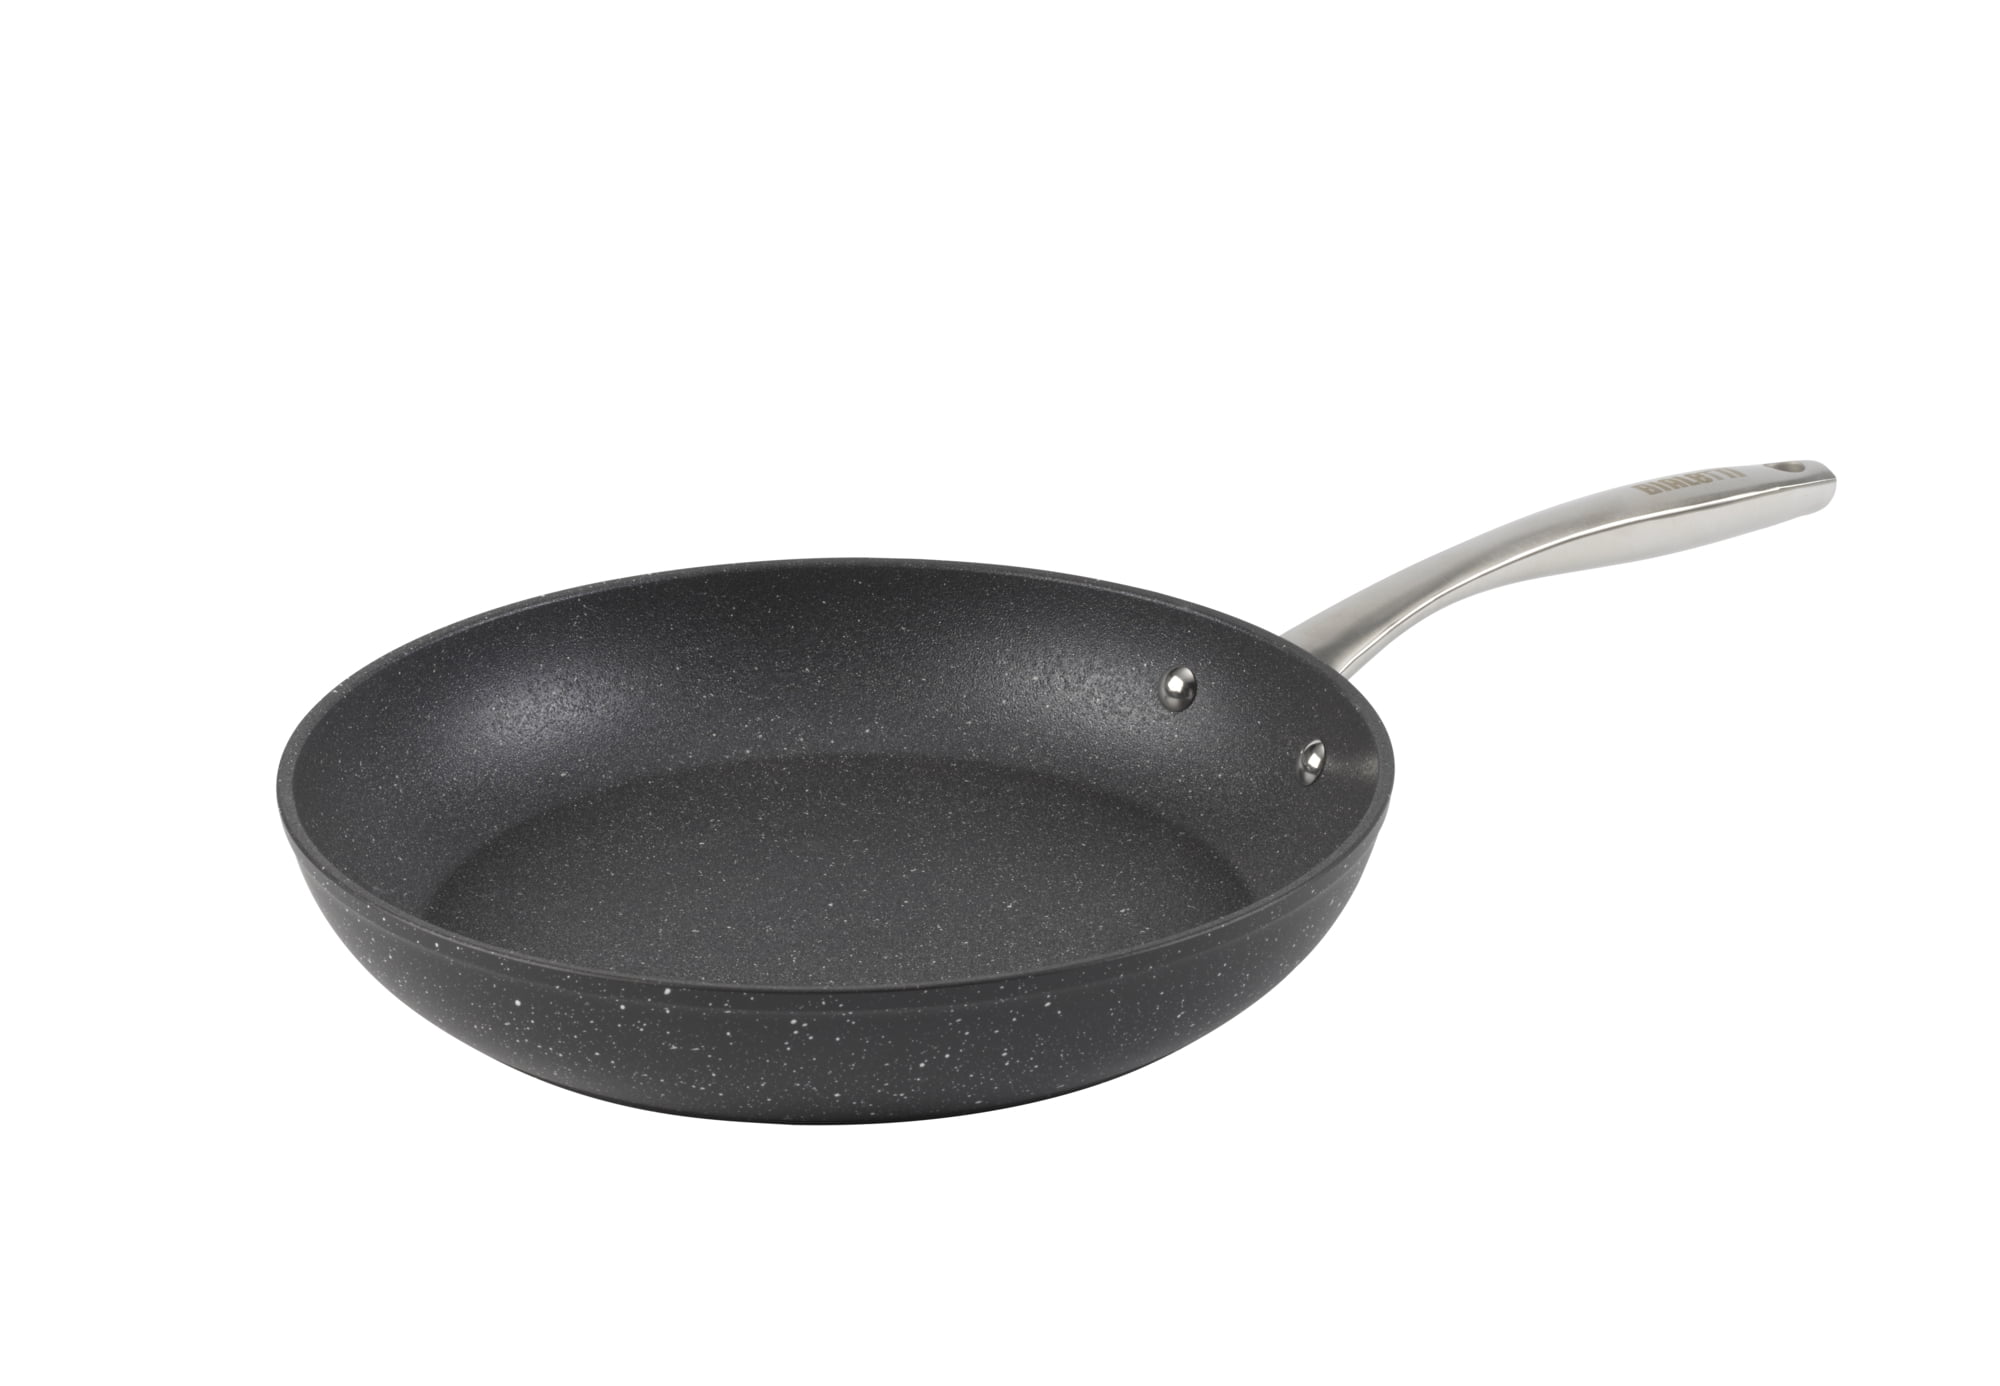 Bialetti Chef's Pan - Black, 12 in - Fred Meyer